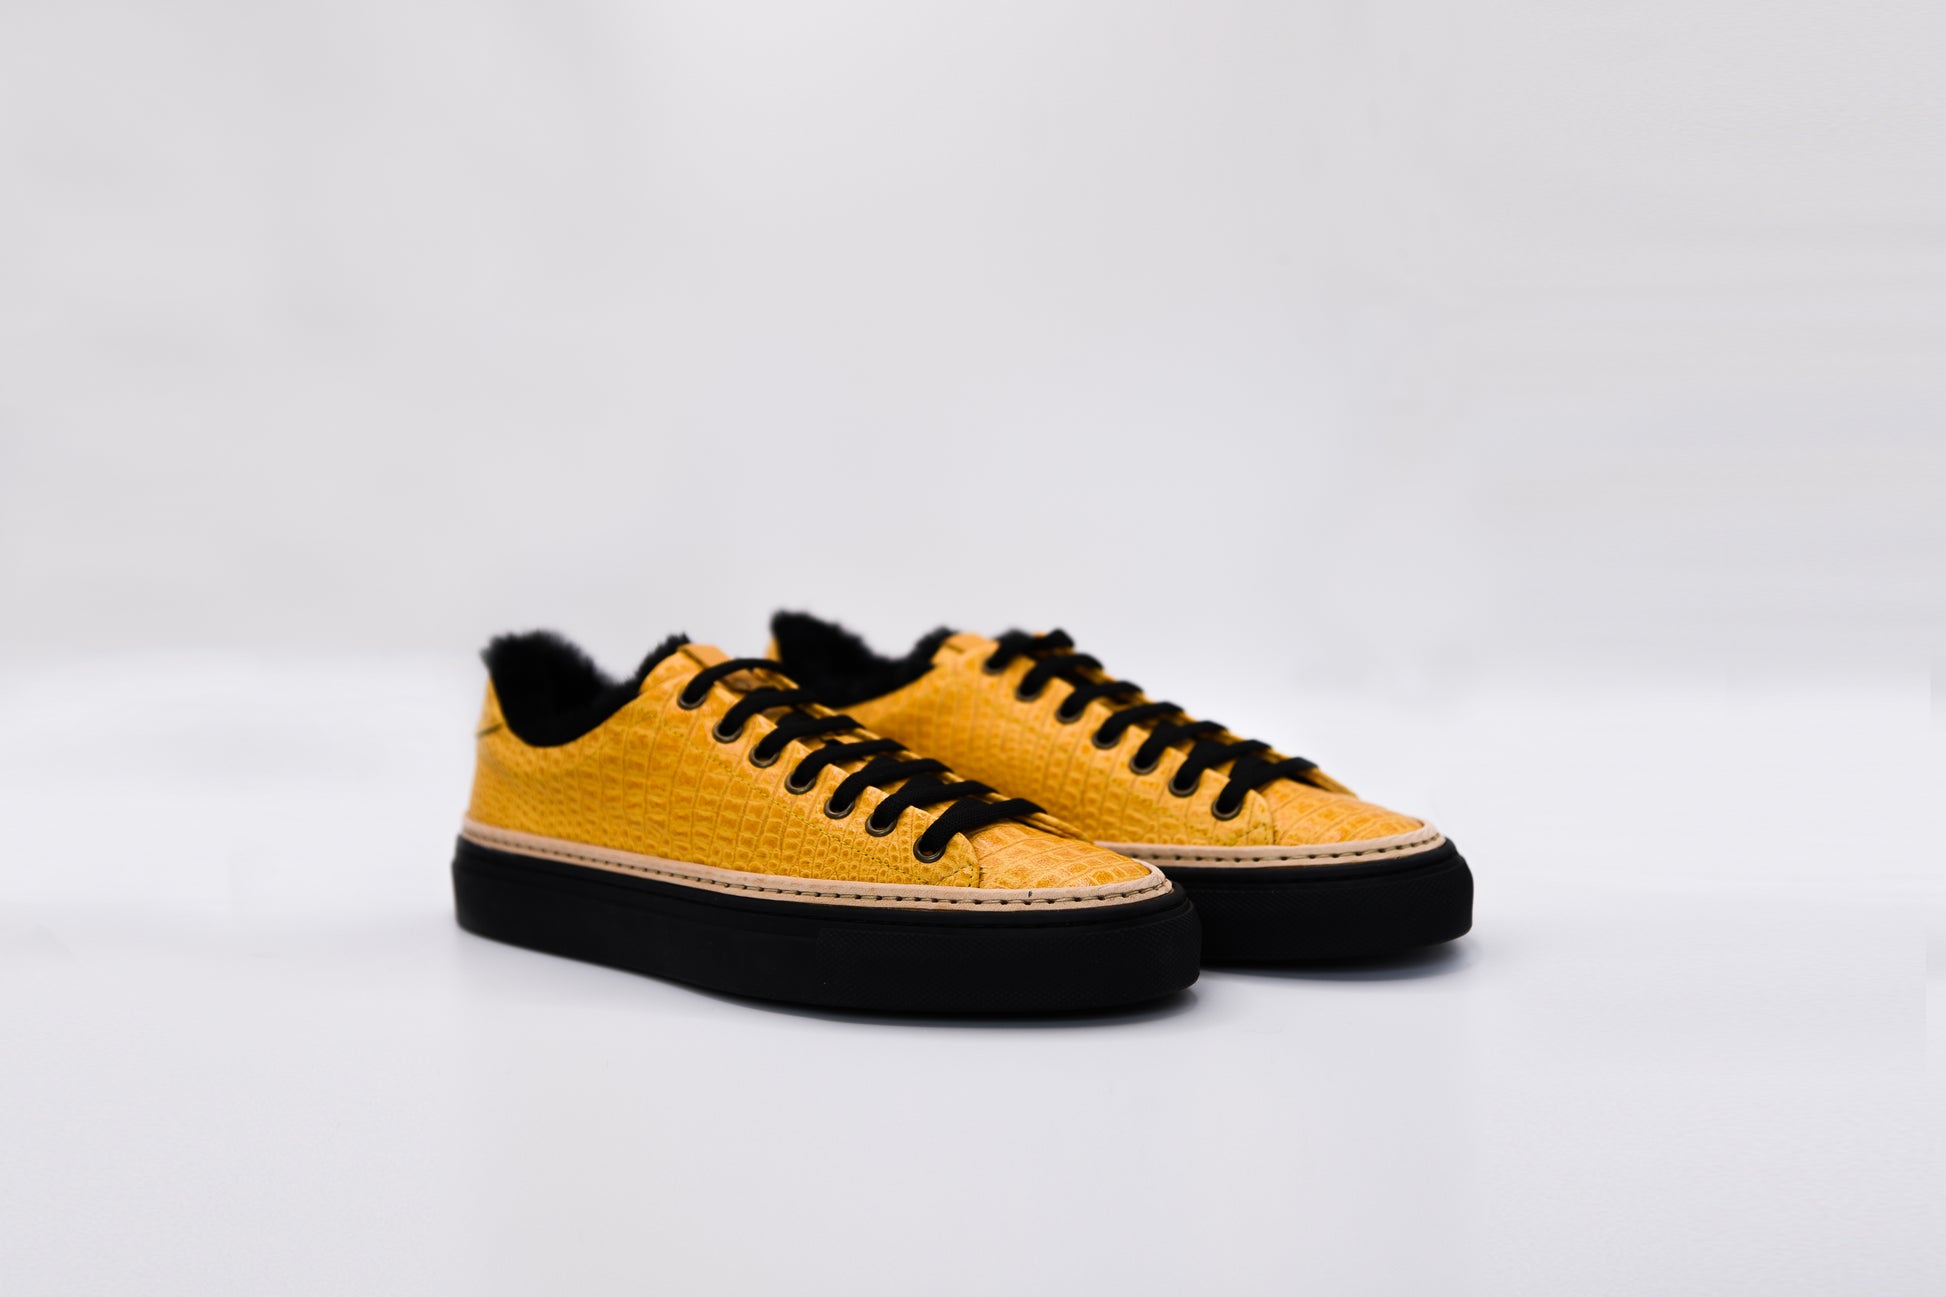 Men’s Yellow Leather Sneakers with Black Eco-Fur